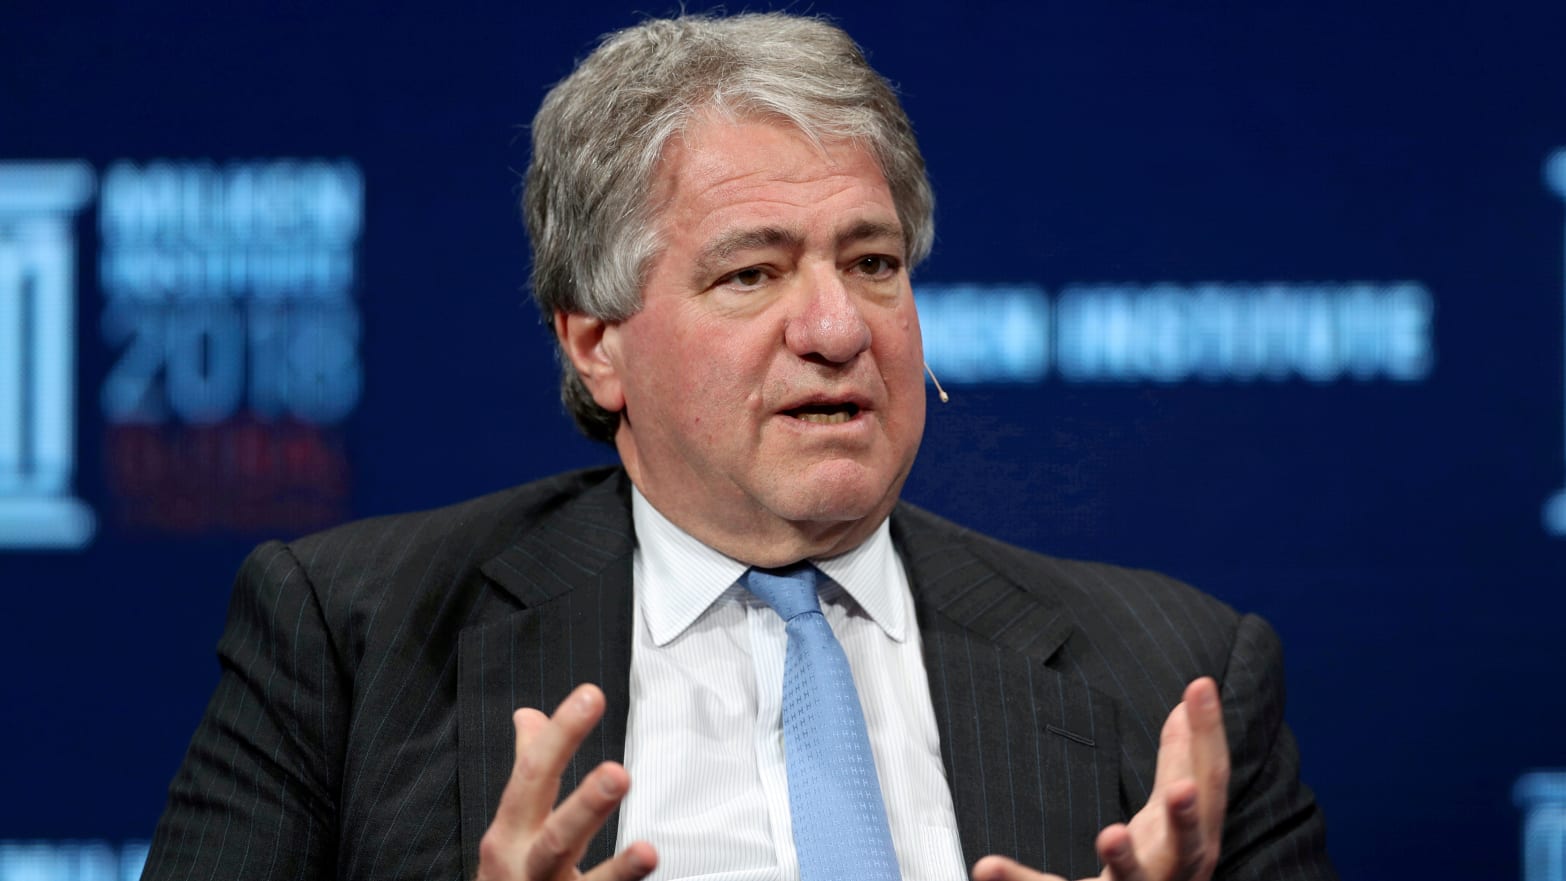 Leon Black pictured speaking in Beverly Hills, California, May 1, 2018